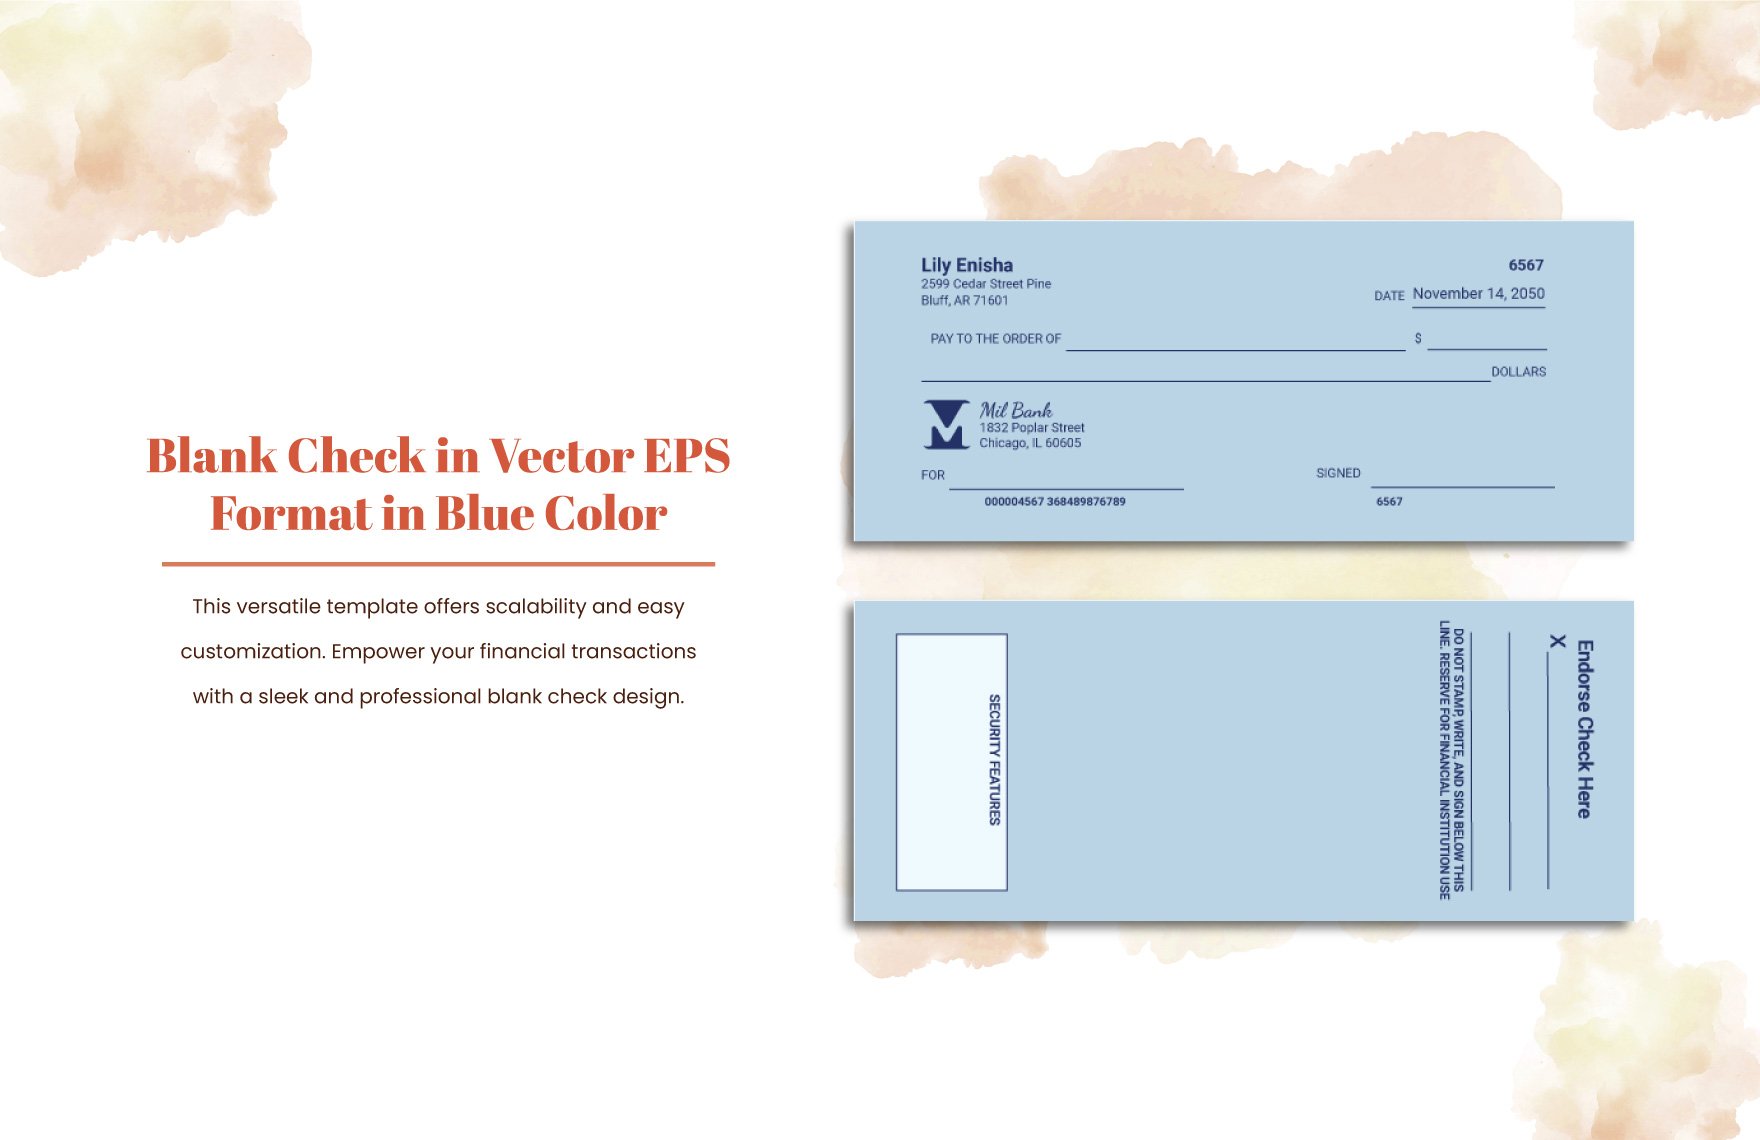 Blank Check in Vector EPS Format in Blue Color in Word, Illustrator, PSD